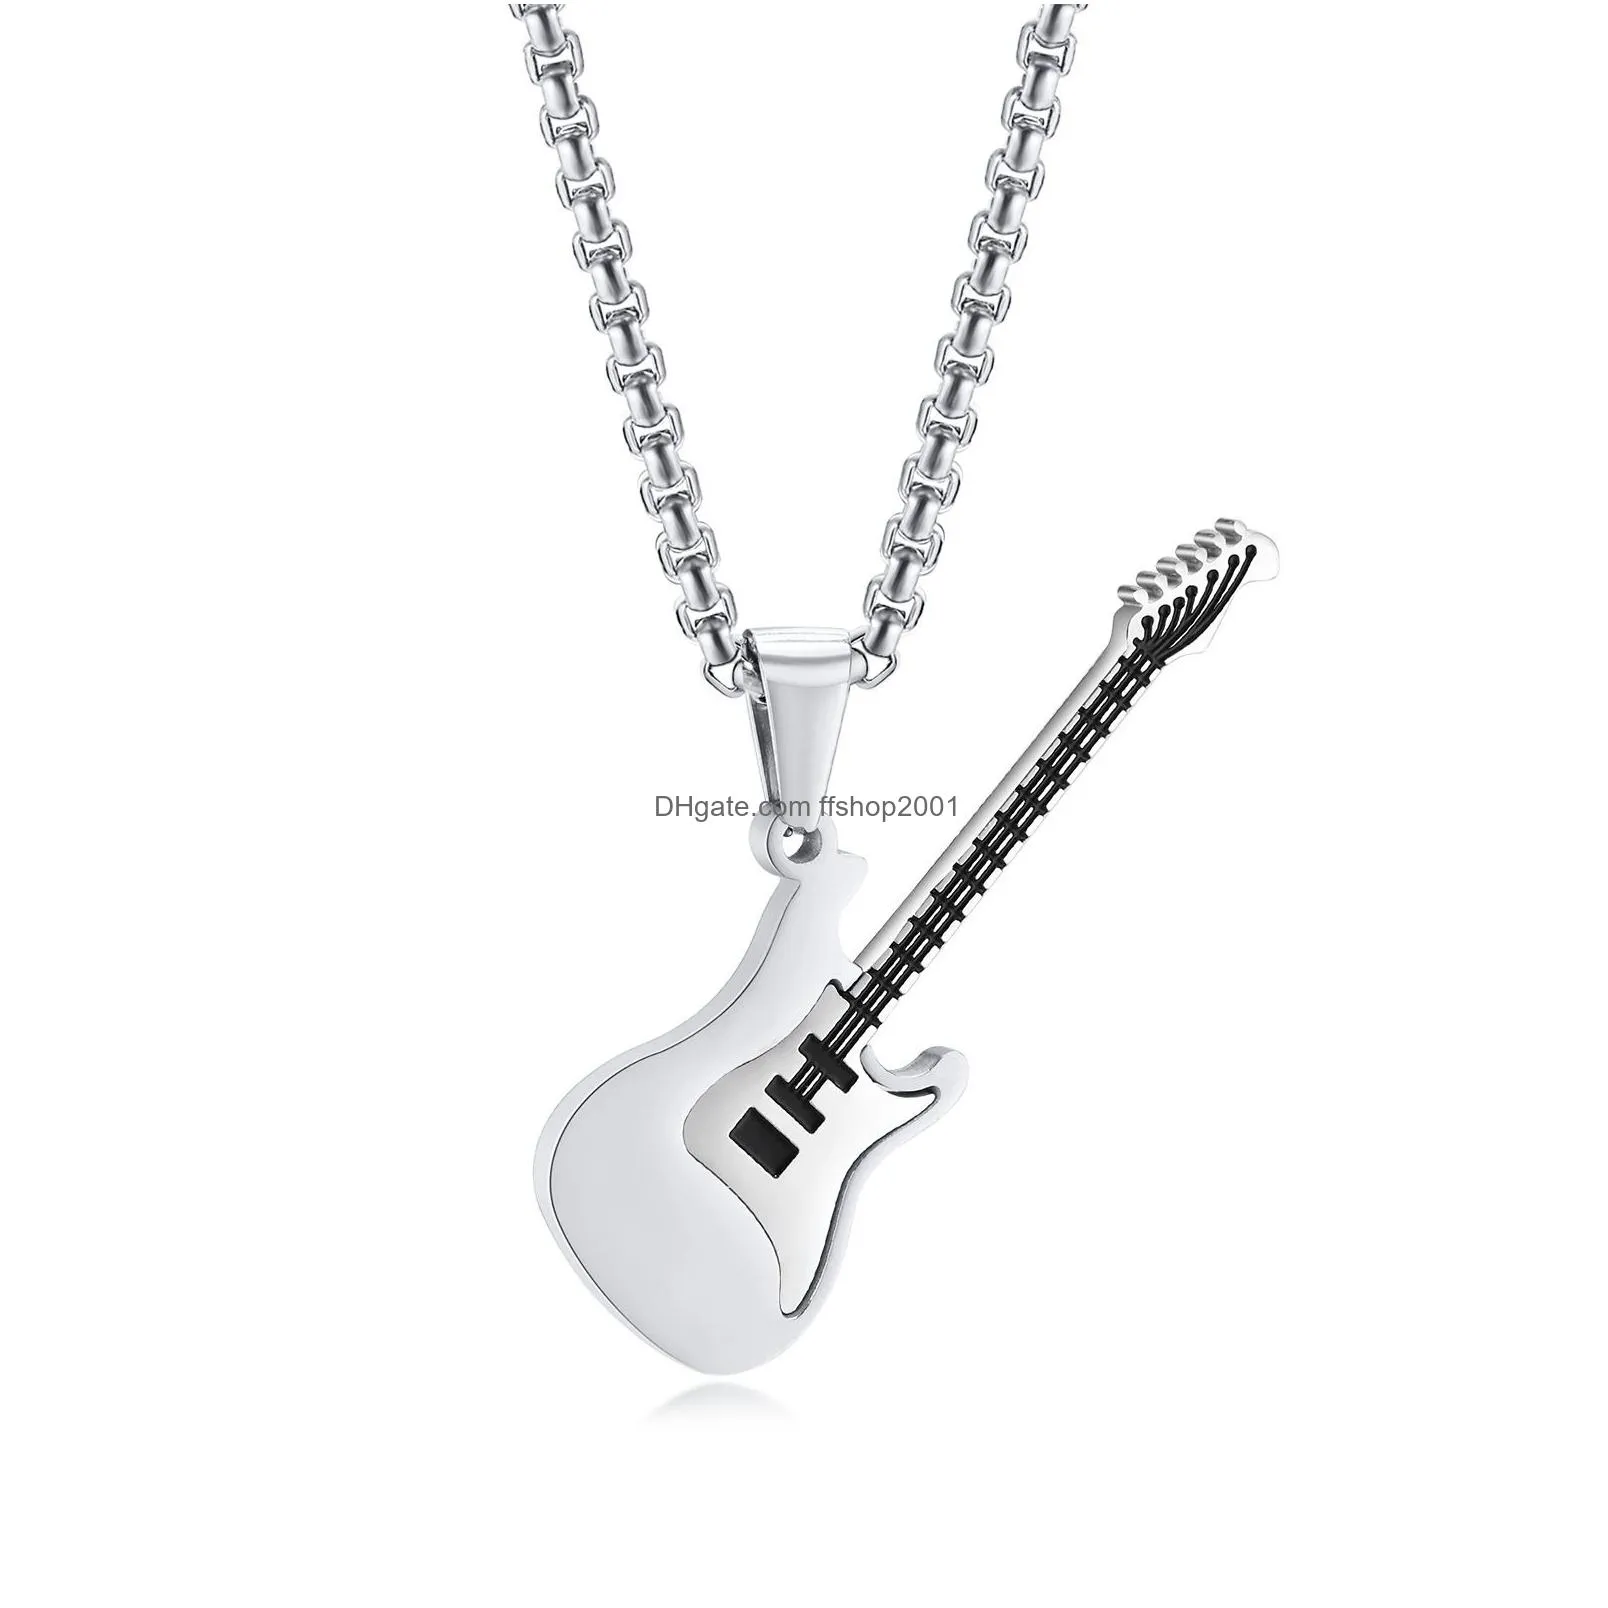 guitar necklaces for men women stainless steel/gold/black color music rock hip hop jewelry gift personalized guitar picks pendant with 24 inch